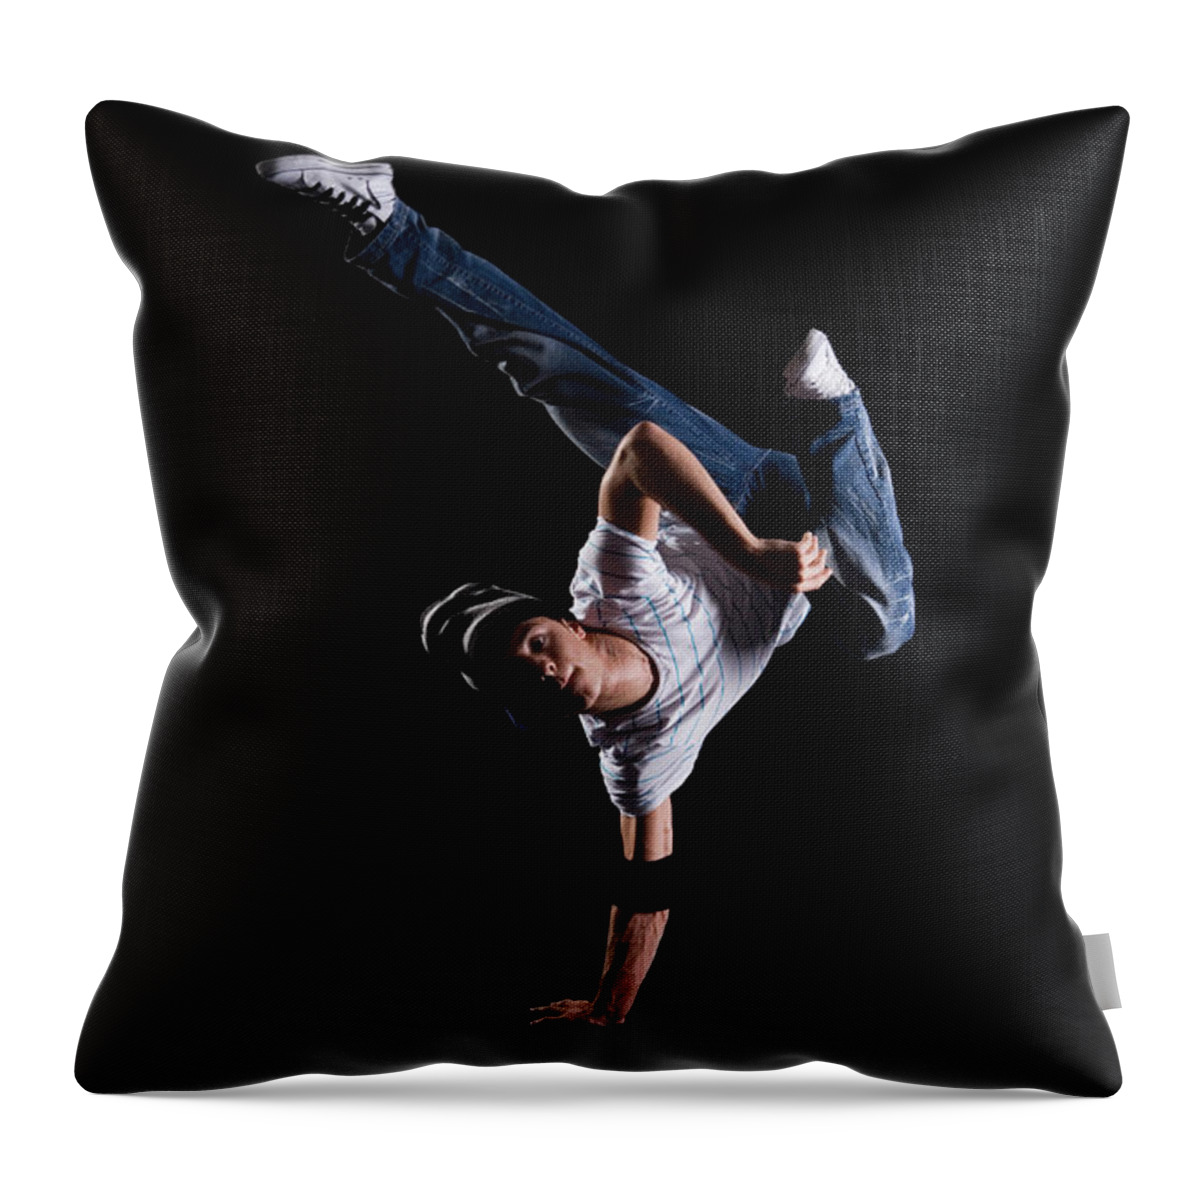 Expertise Throw Pillow featuring the photograph A B-boy Doing A K-kick Breakdance Move by Halfdark